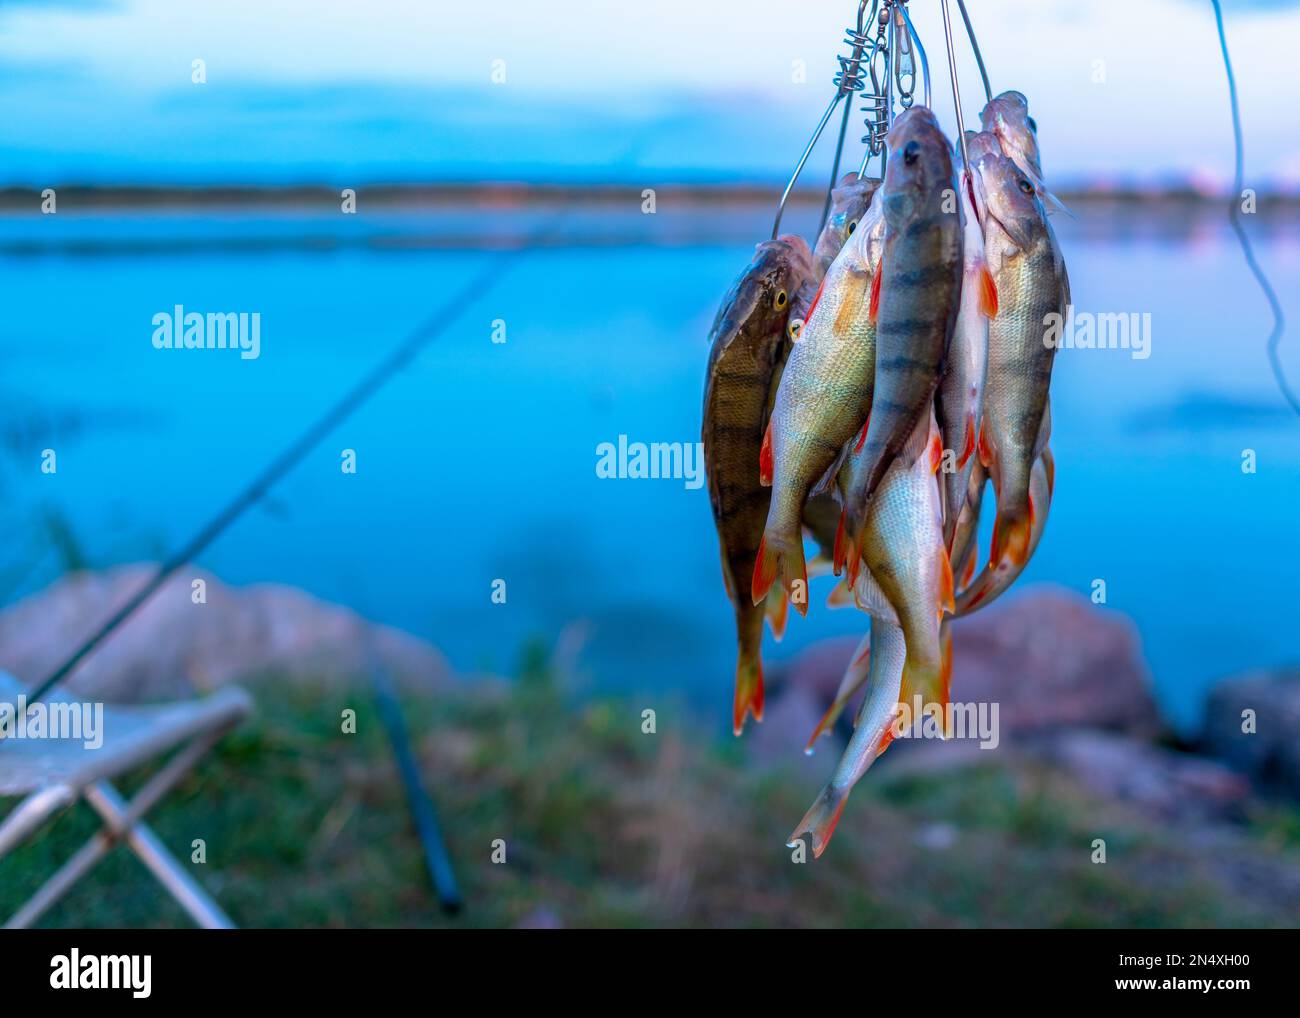 https://c8.alamy.com/comp/2N4XH00/a-lot-of-fish-hanging-perch-caught-by-angler-fish-stringer-on-the-background-of-evening-sunset-on-the-lake-and-fishing-rods-spinning-on-a-chair-2N4XH00.jpg